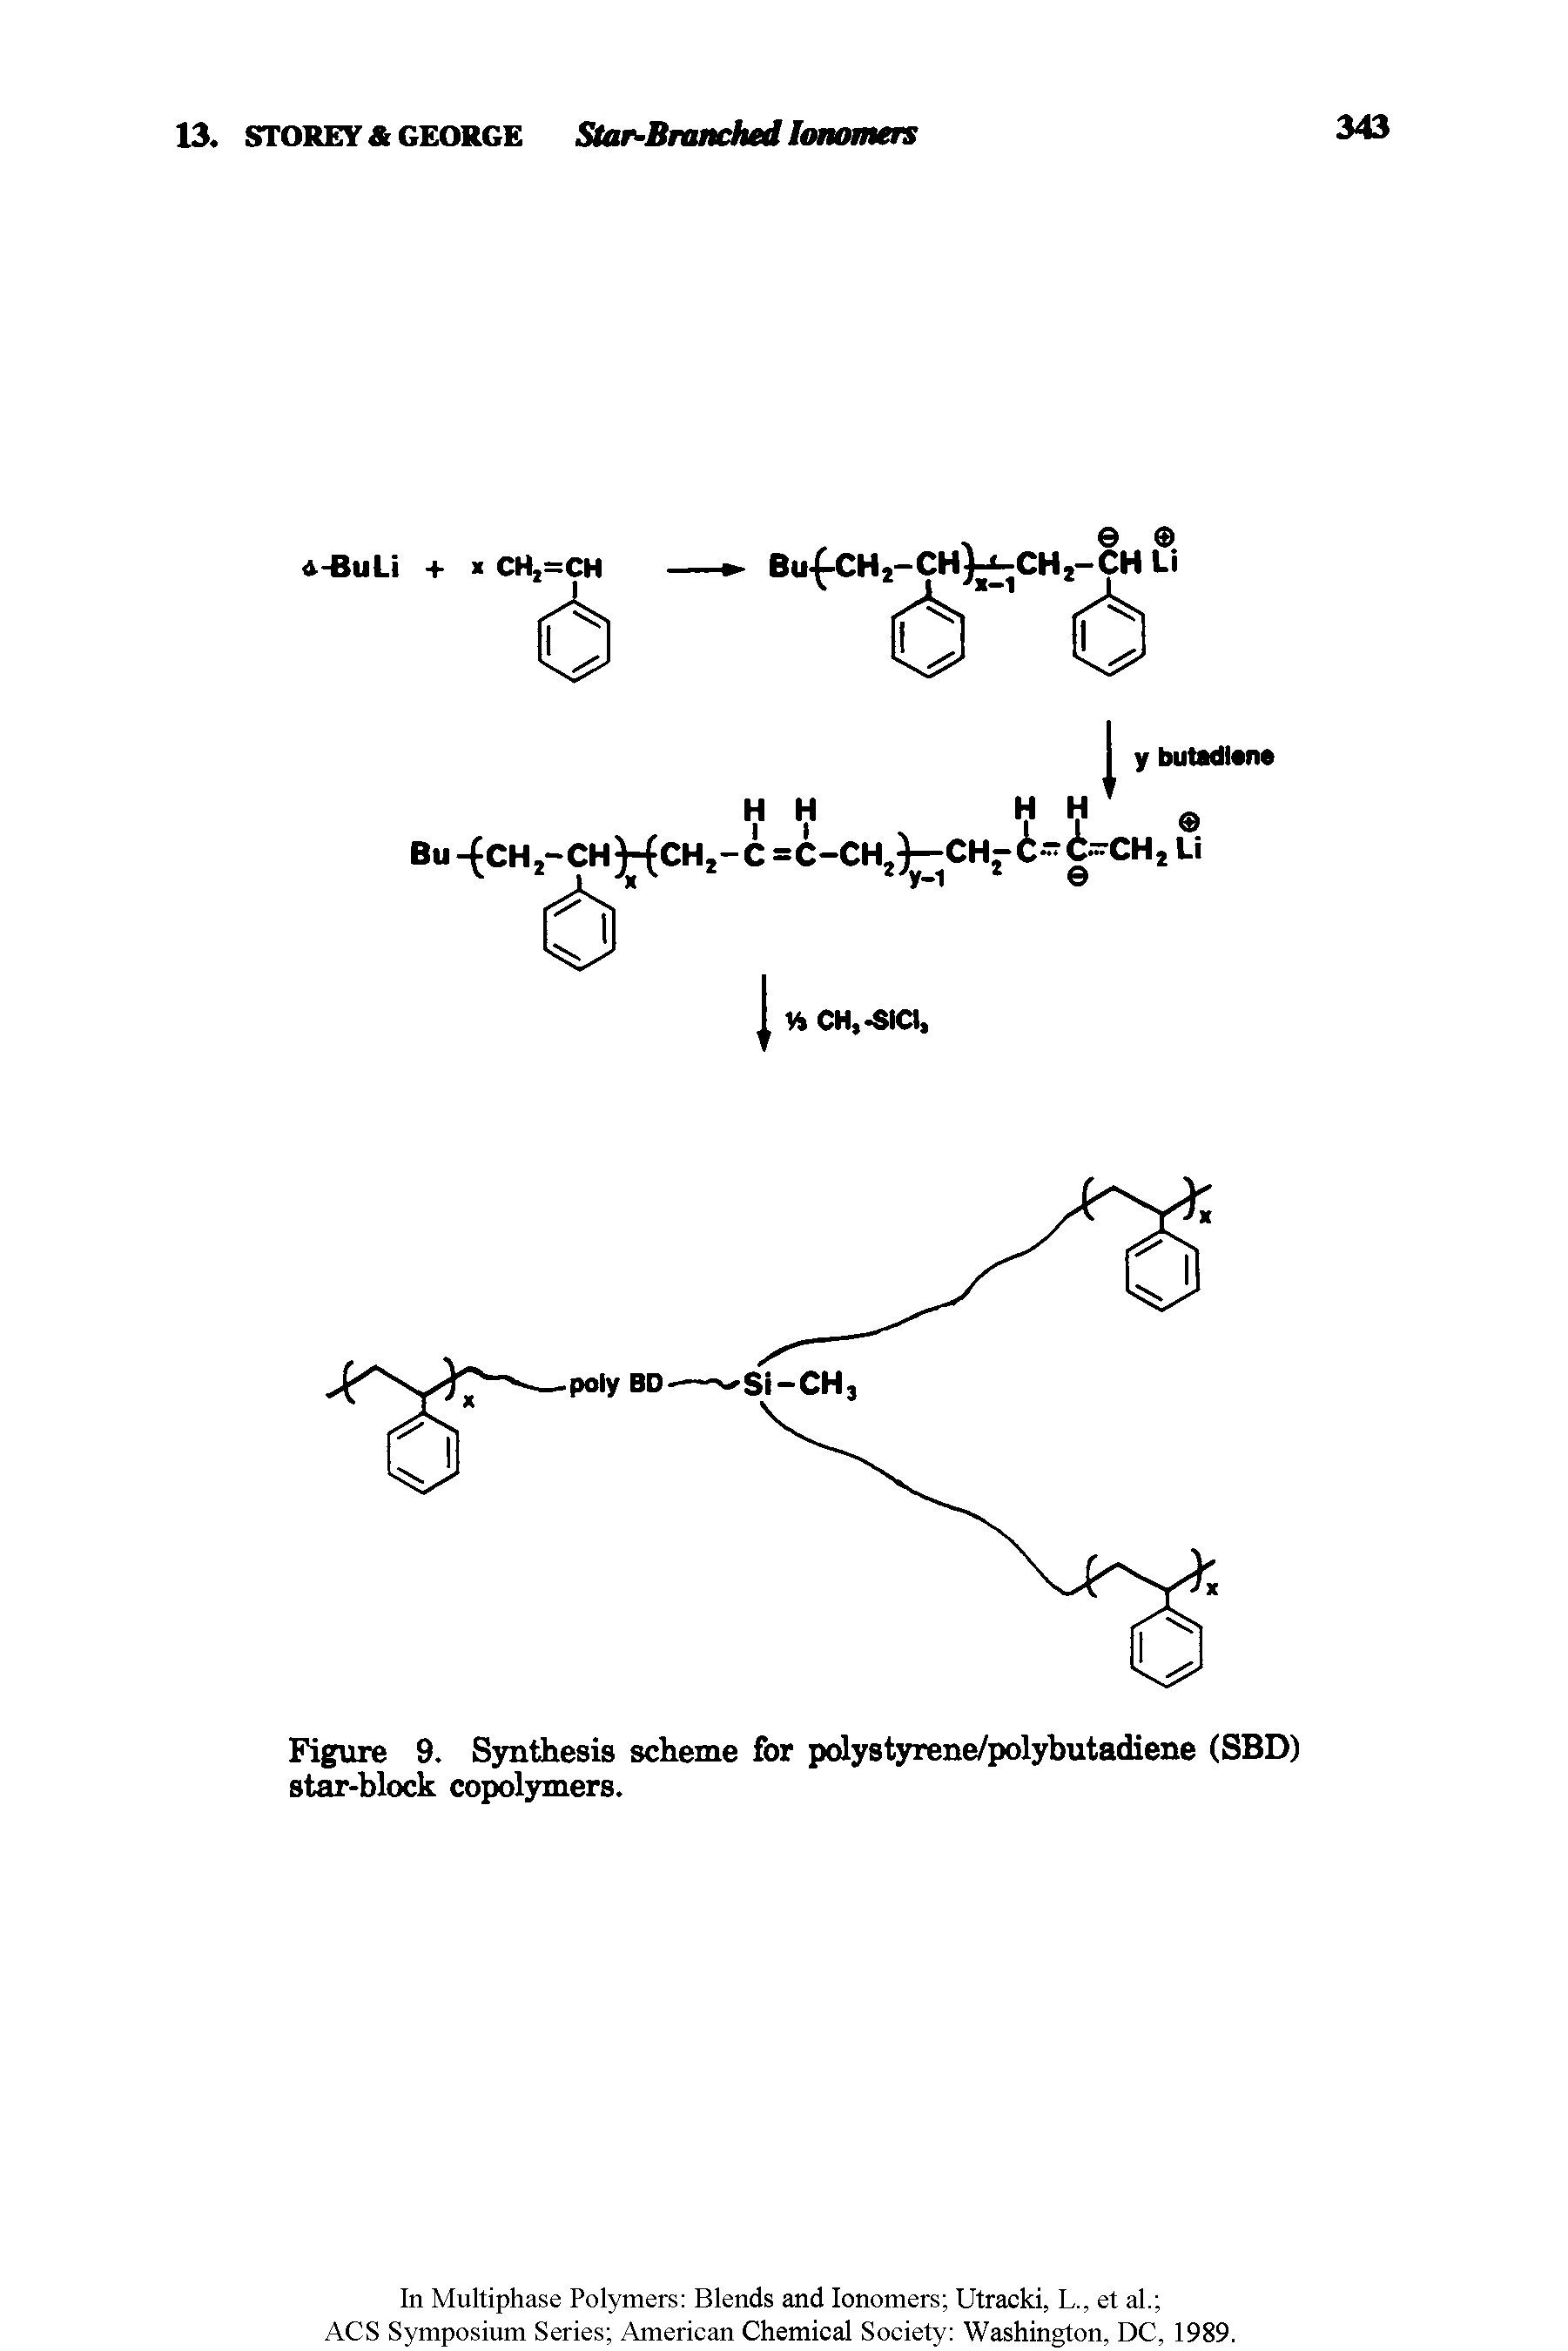 Figure 9. Synthesis scheme for polystyrene/polybutadiene (SBD) star-block copolymers.